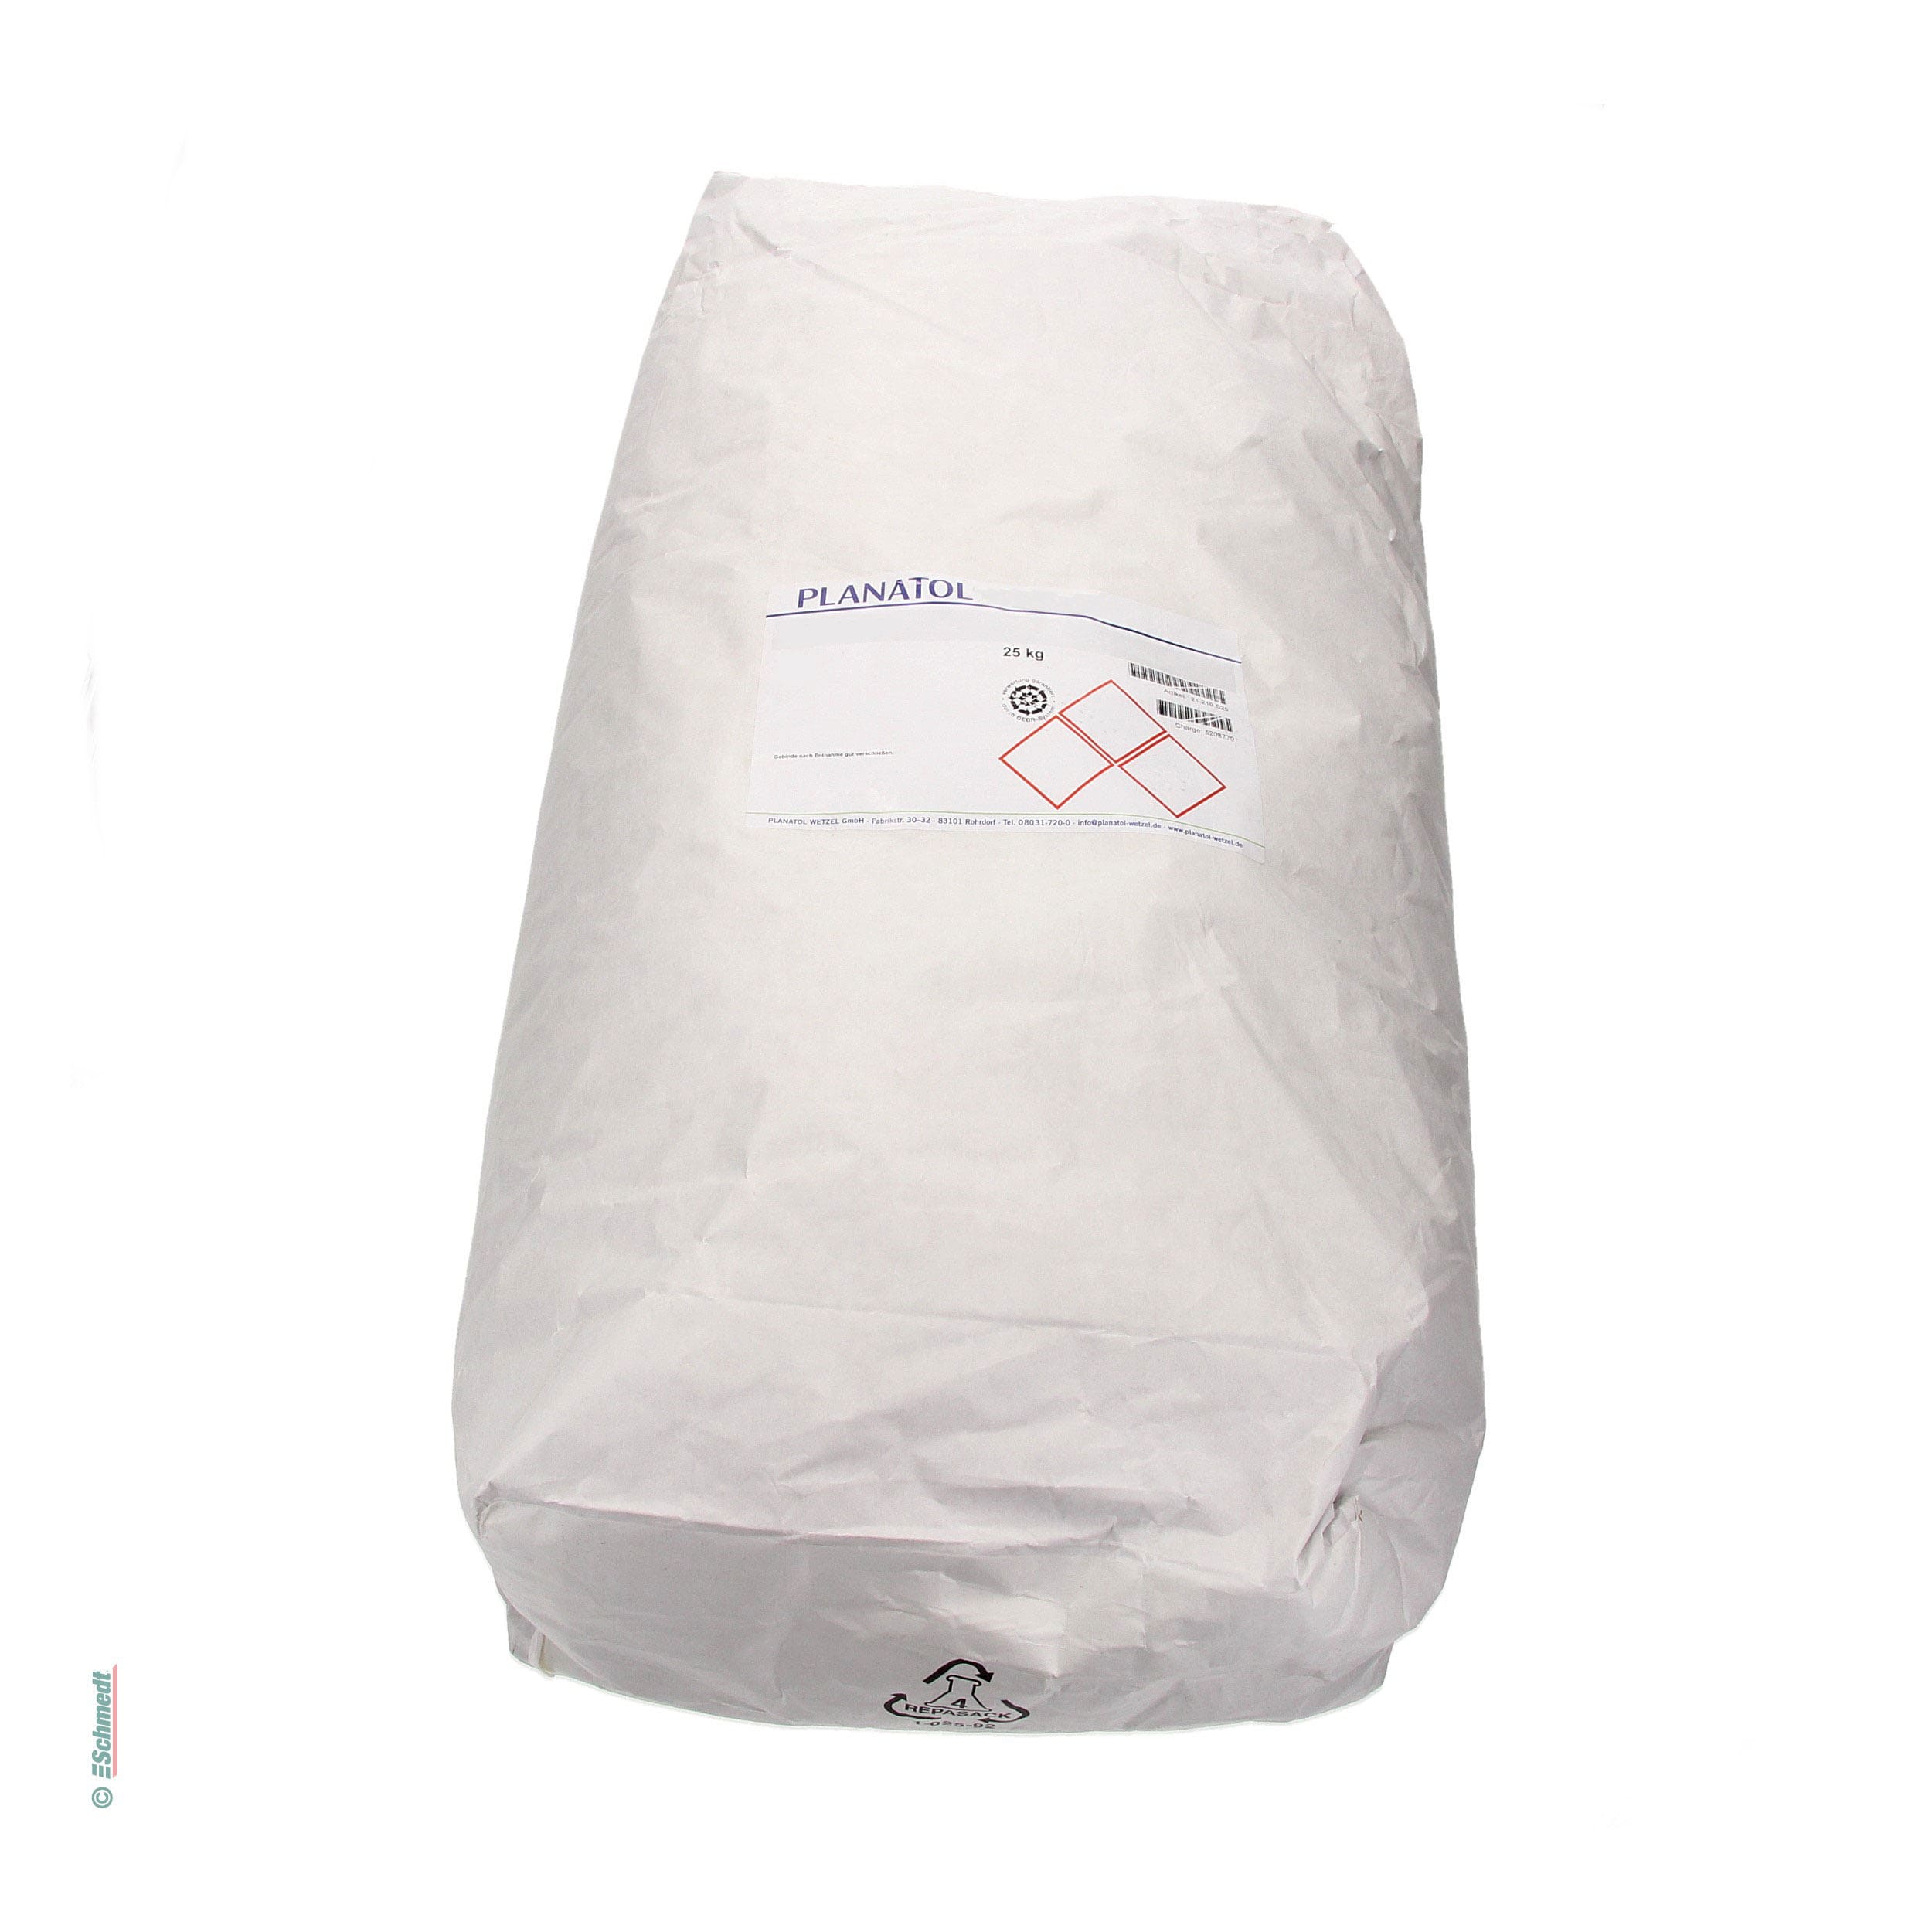 Planamelt S - hotmelt glue - Contents Bag / 25 kgs - suitable for side gluing on any common fanbinder, endsheet gluing...